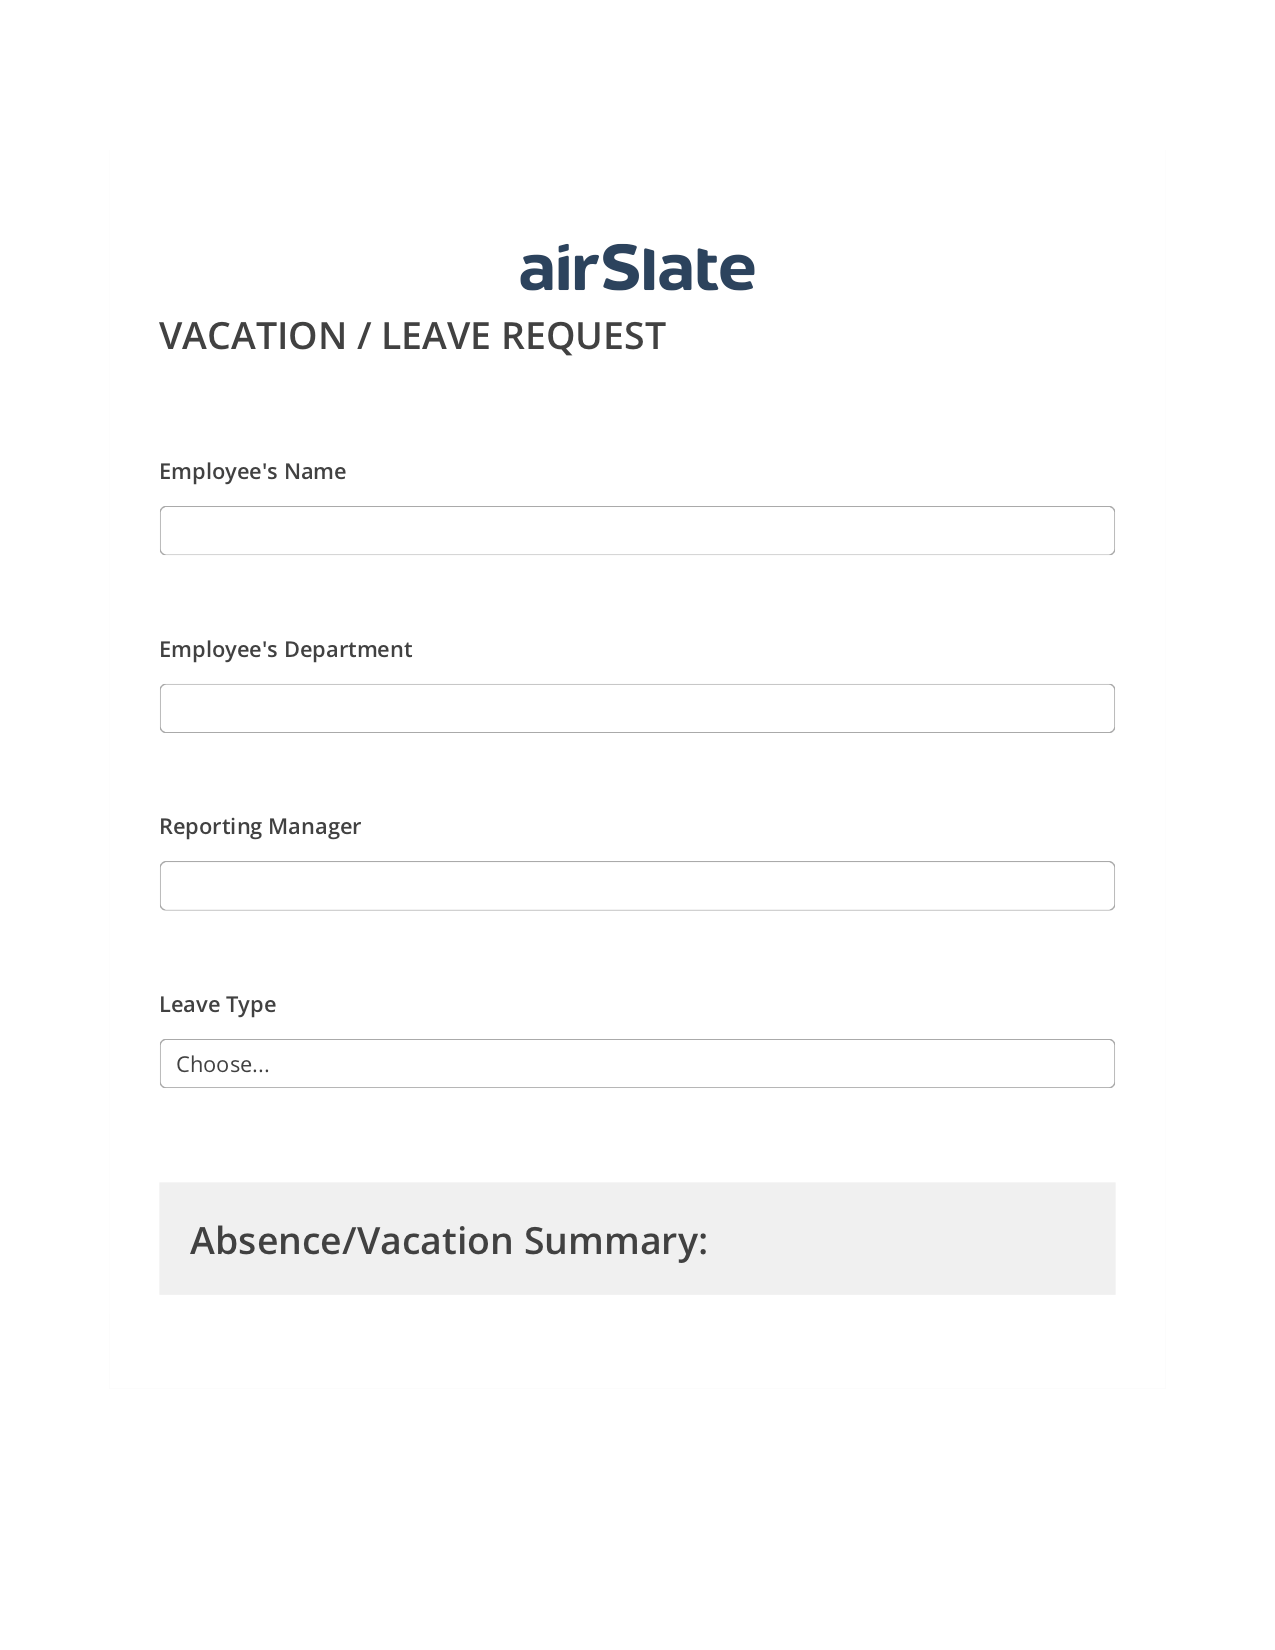 Vacation/Leave Request Workflow Pre-fill from Excel Spreadsheet Bot, Create slate addon, Archive to Dropbox Bot